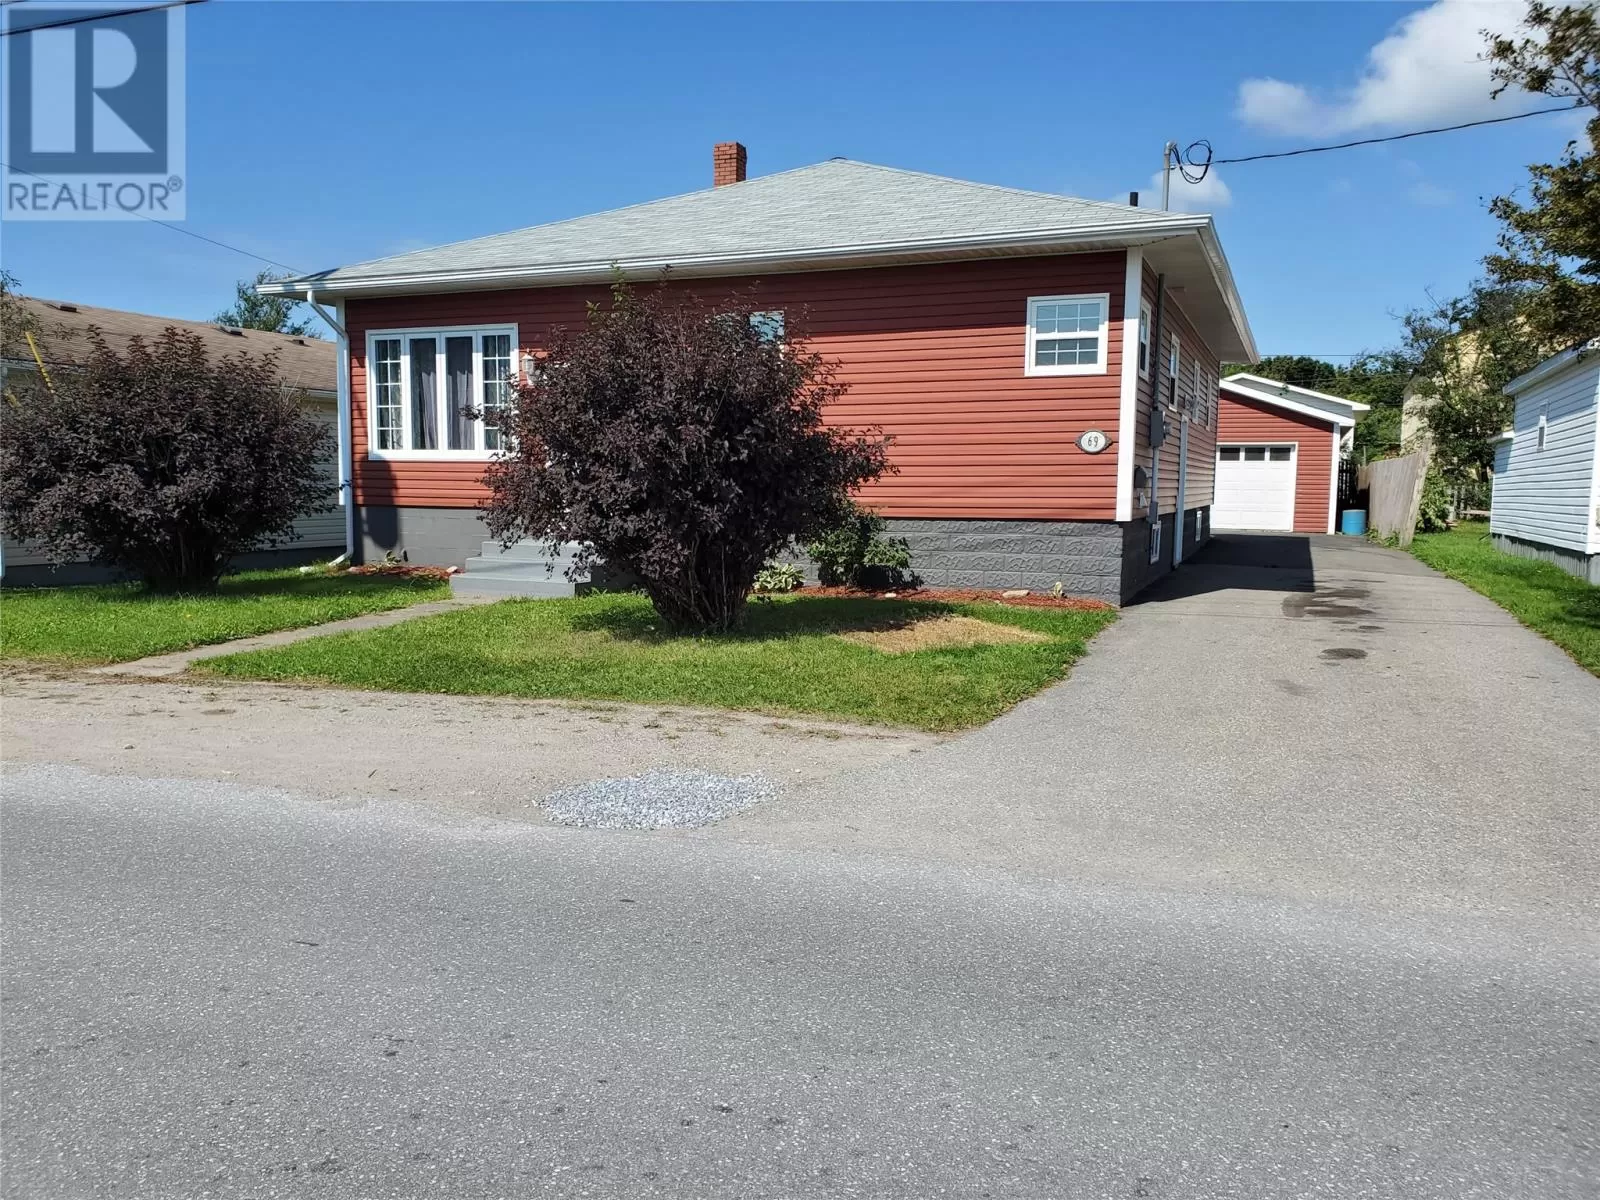 House for rent: 69 St. Clare Avenue, Stephenville, Newfoundland & Labrador A2N 1P2